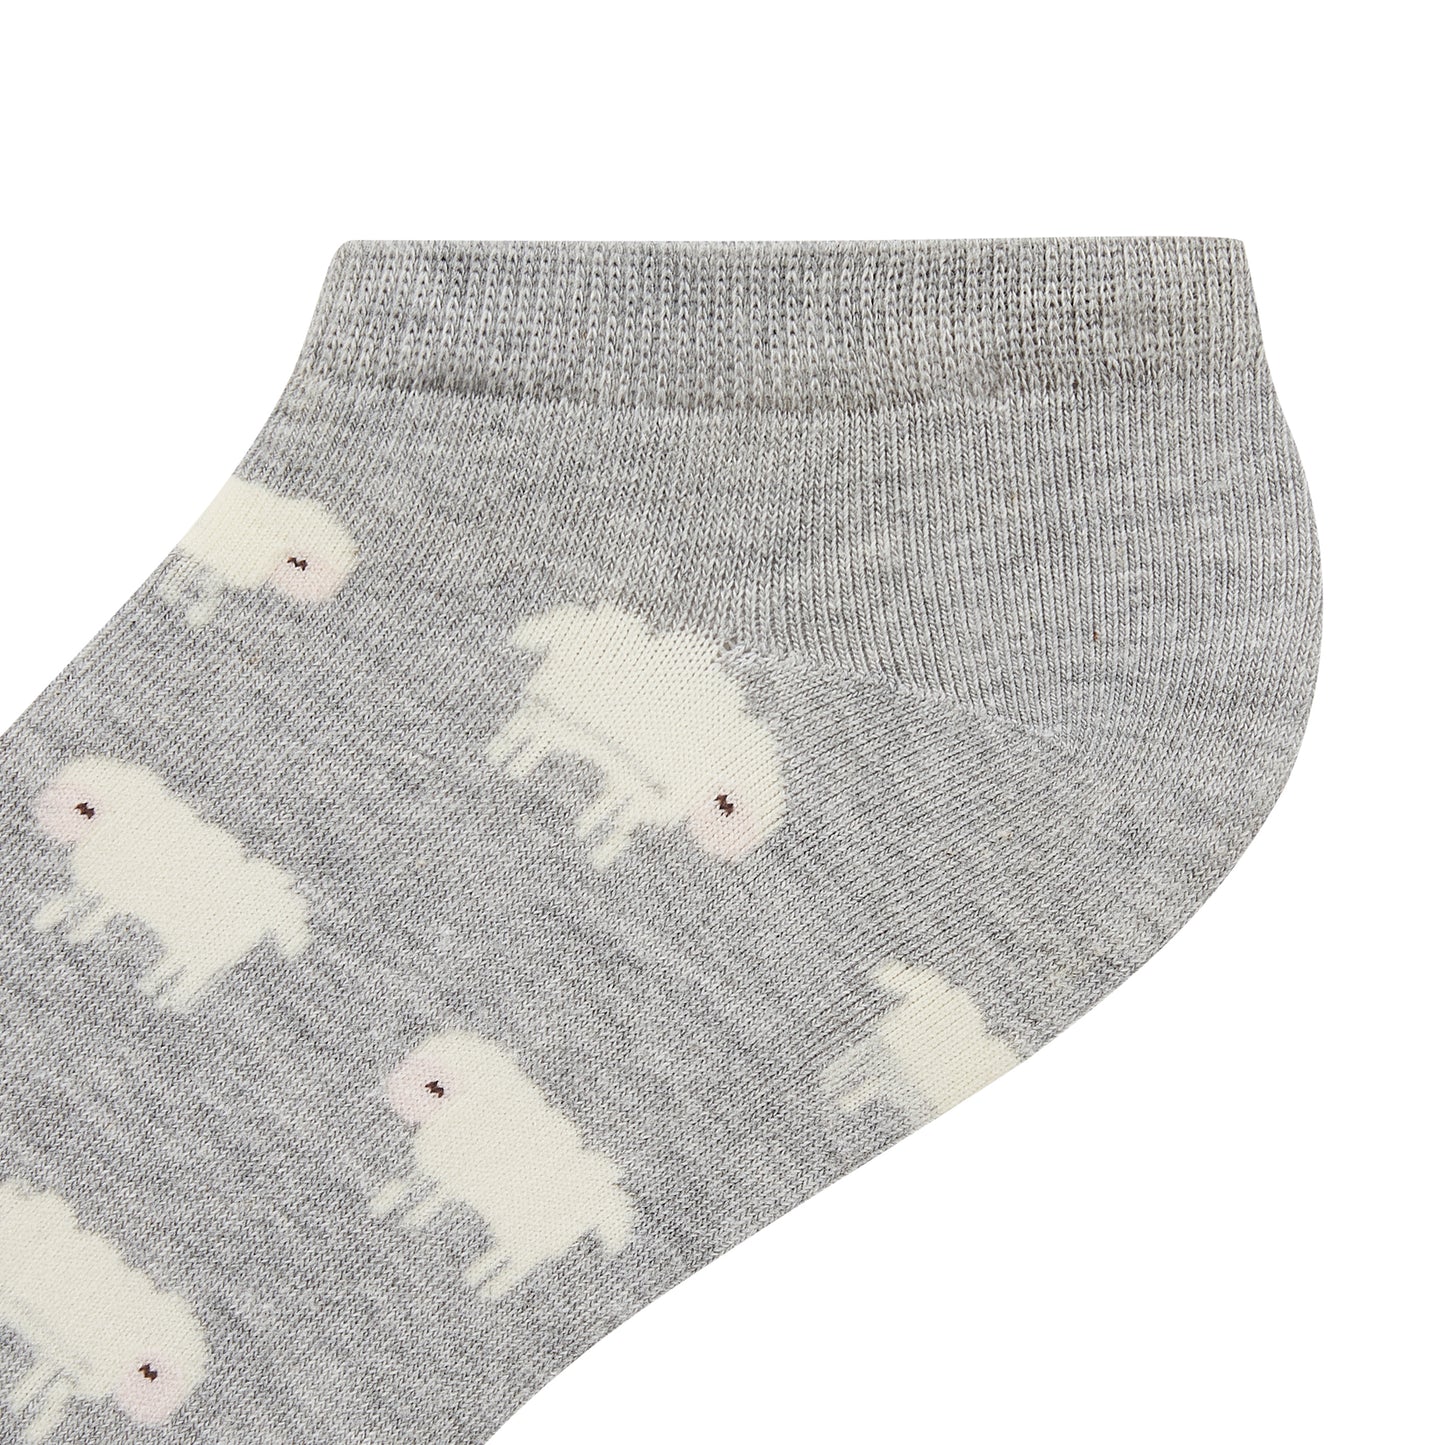 IDENTITY Apparel Women's Seasons Collection Printed Ankle Socks